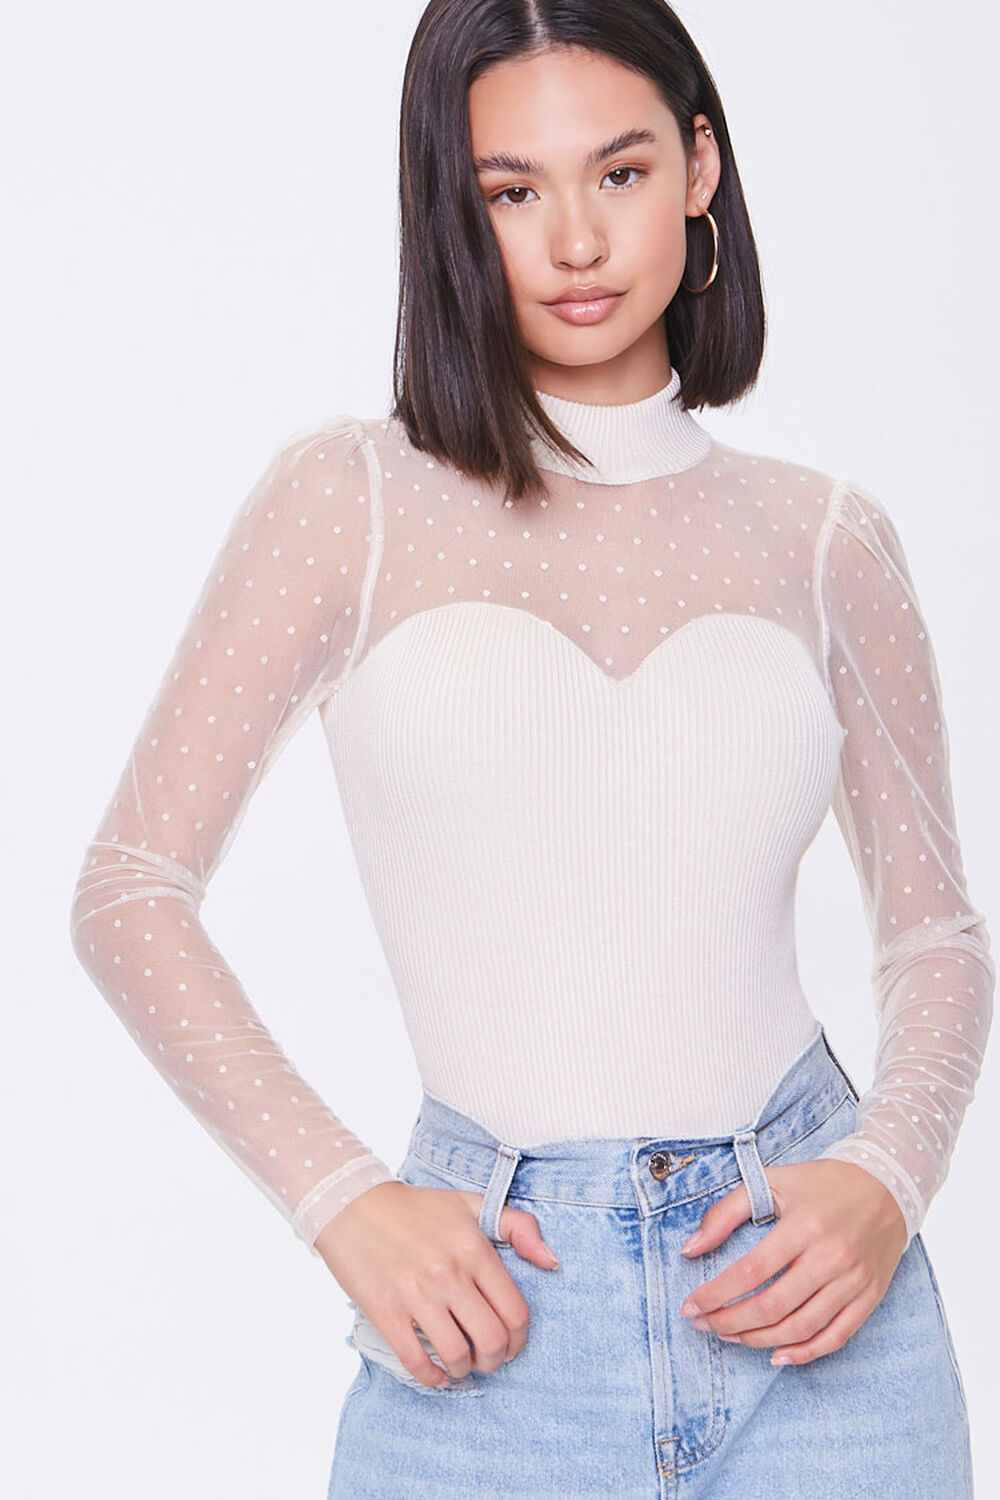 Dotted Sweater-Knit Bodysuit, image 1